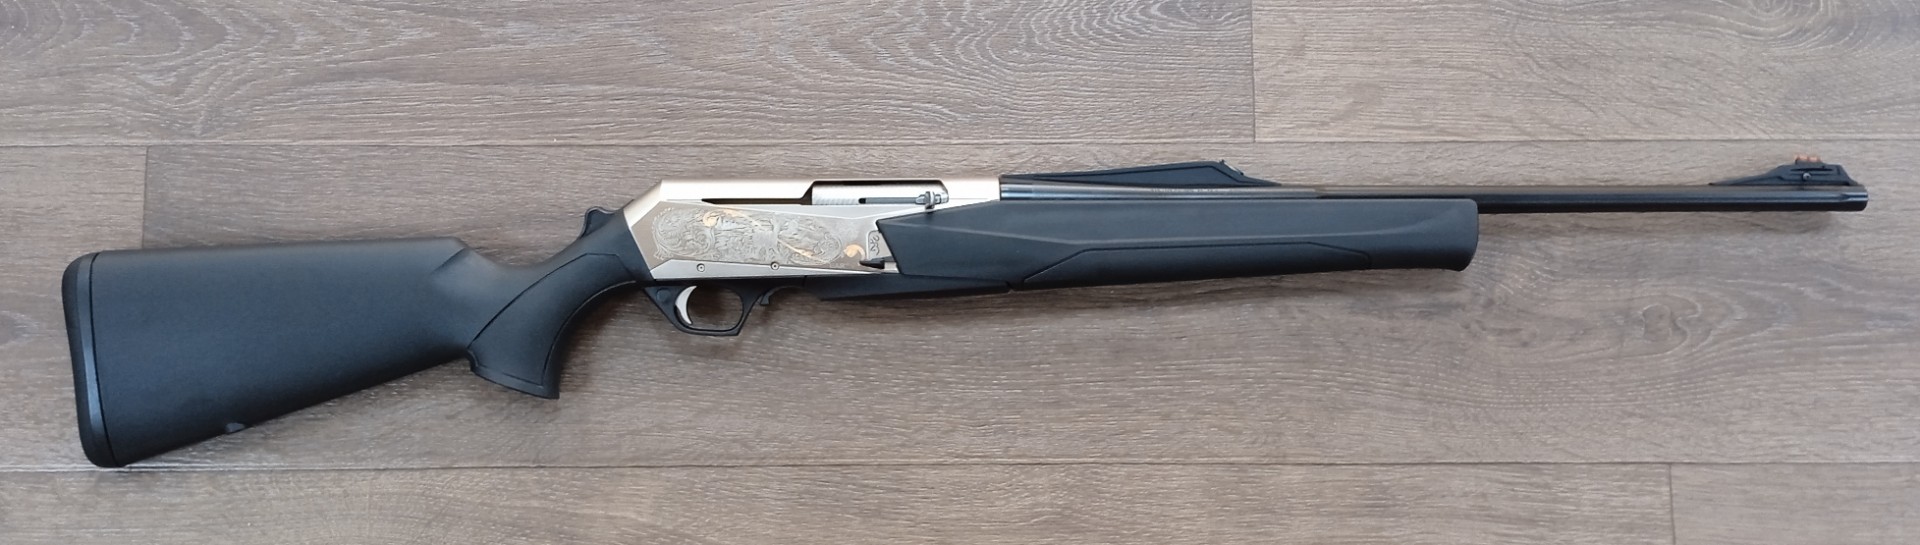 Browning Bar .30-06 MK3 Compo Eclipse Gold fluted HC 530